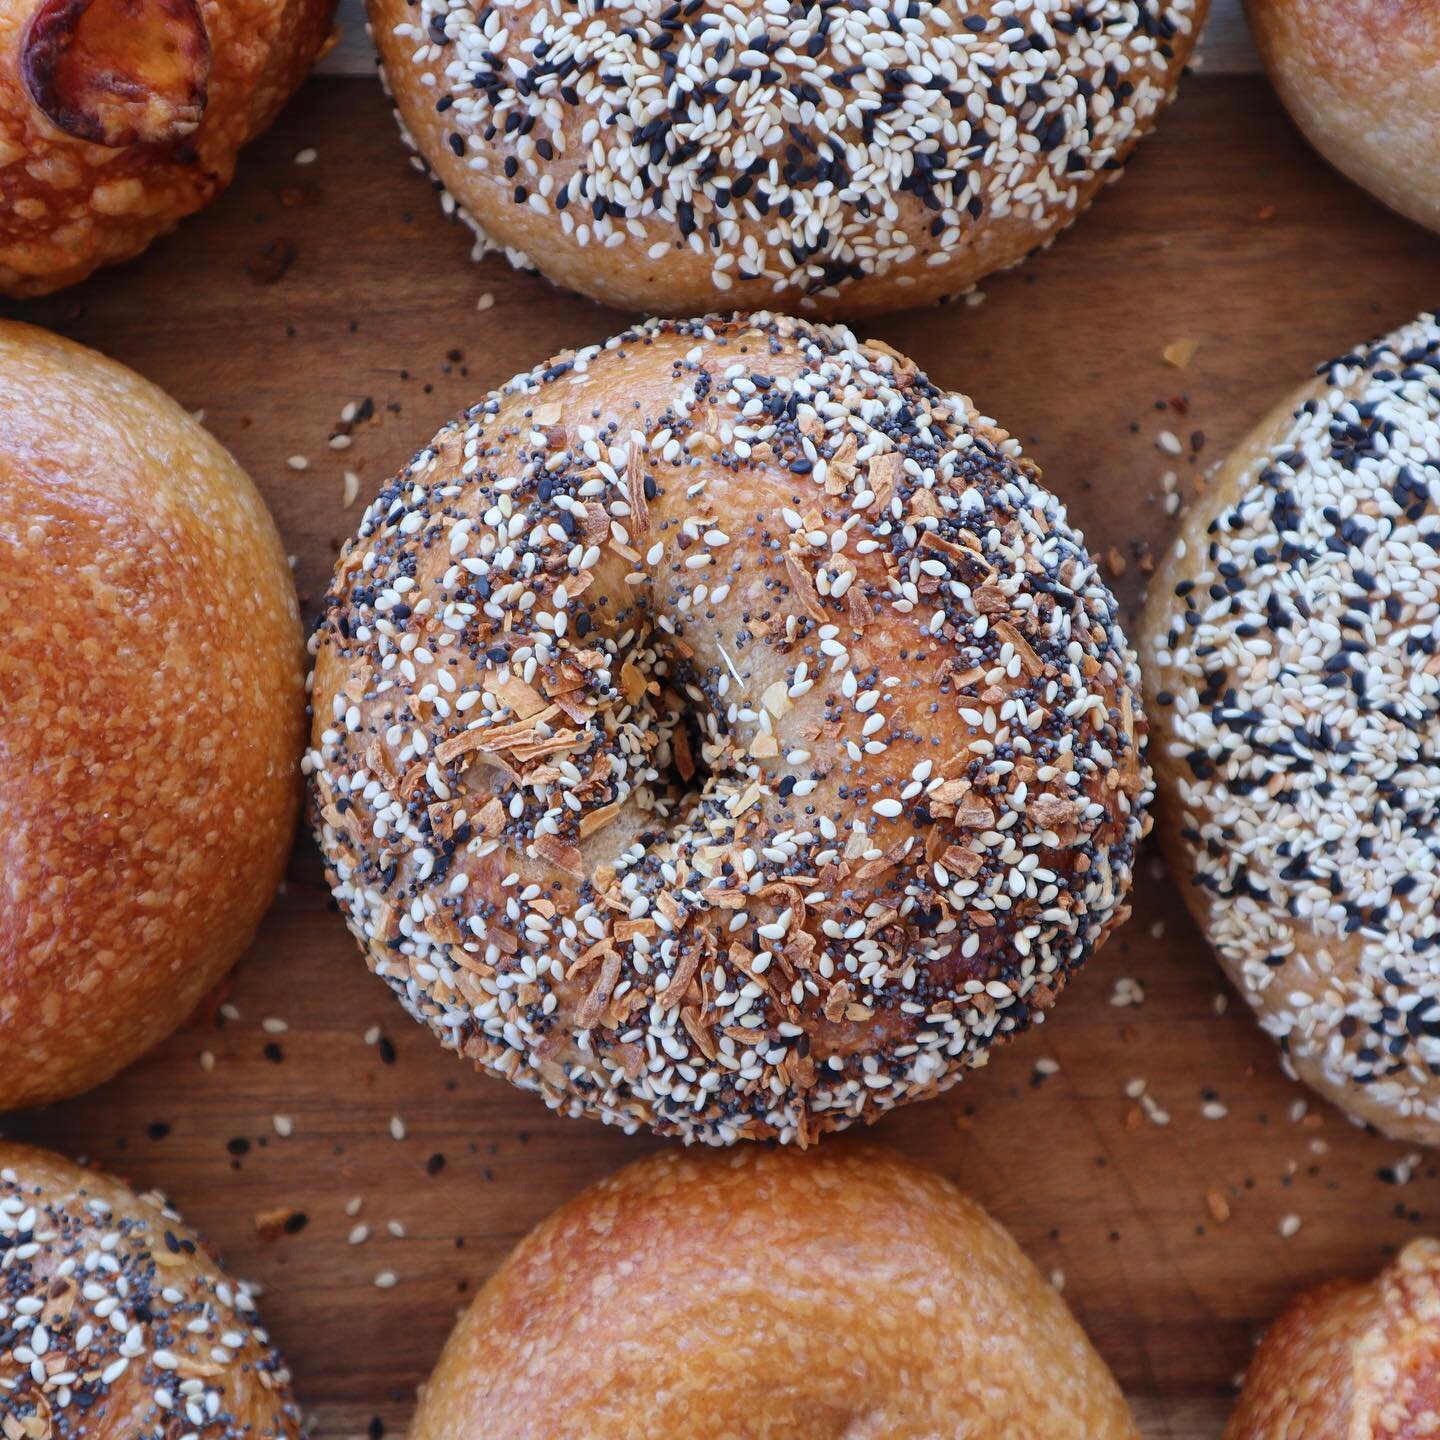 Interested in Catering? Have family coming over for the holidays? We&rsquo;re your bagel spot! 
Introducing our new Catering Menu!
.
Package 1 | Feeds 4-6
Bagel box, 8oz tub of CC, Fish Box
.
Package 2 | Feeds 8-12
Two Bagel boxes, Two 8oz tub of CC,